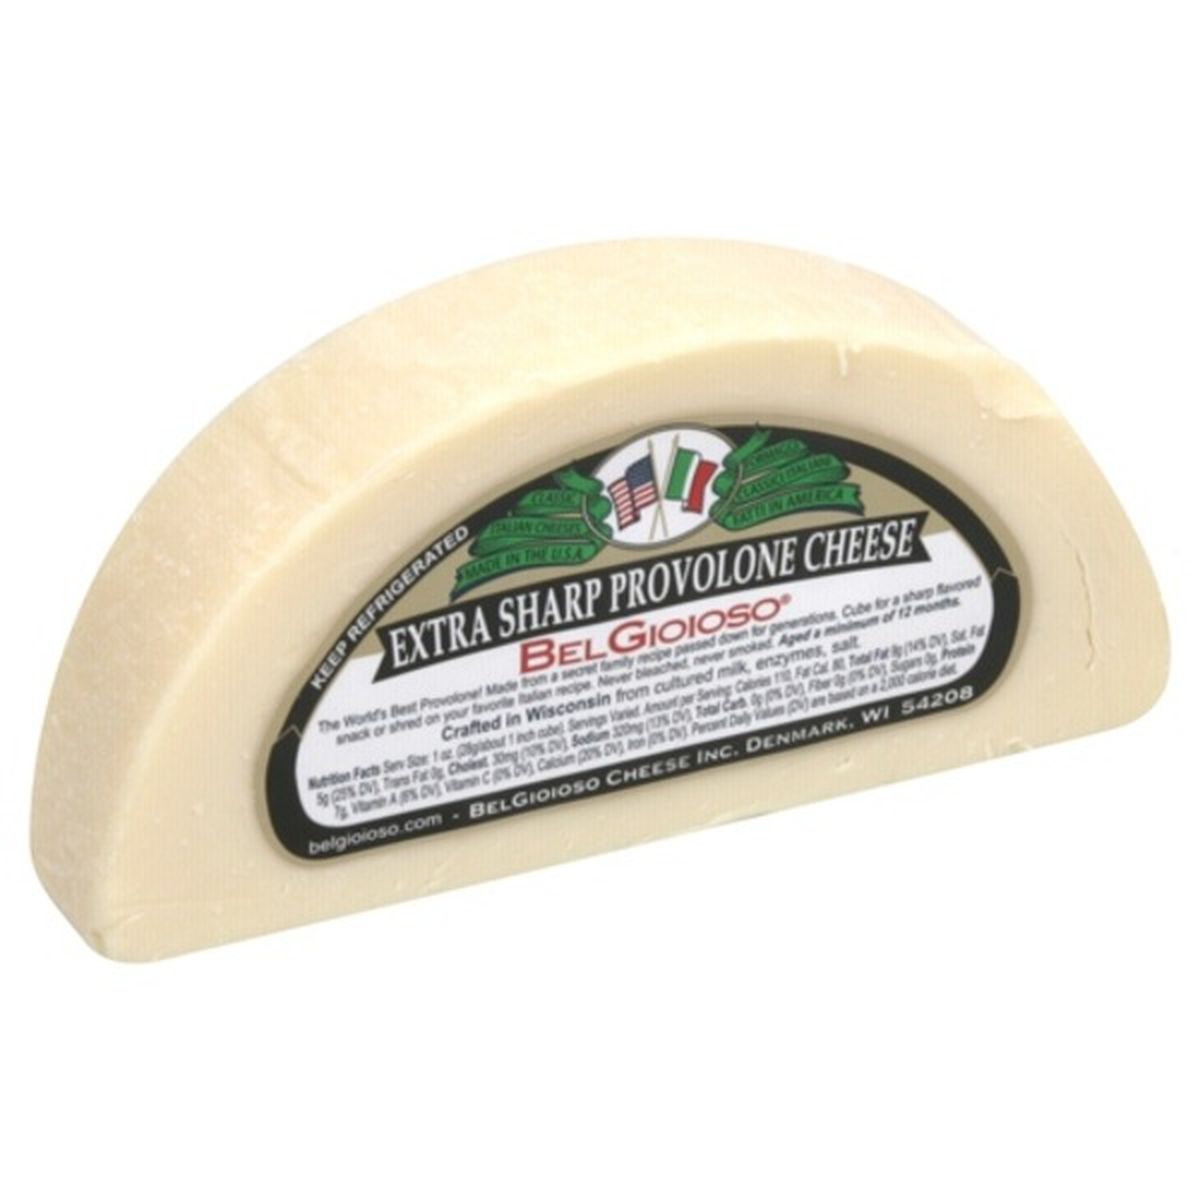 Calories in BelGioioso Extra Sharp Provolone Cheese